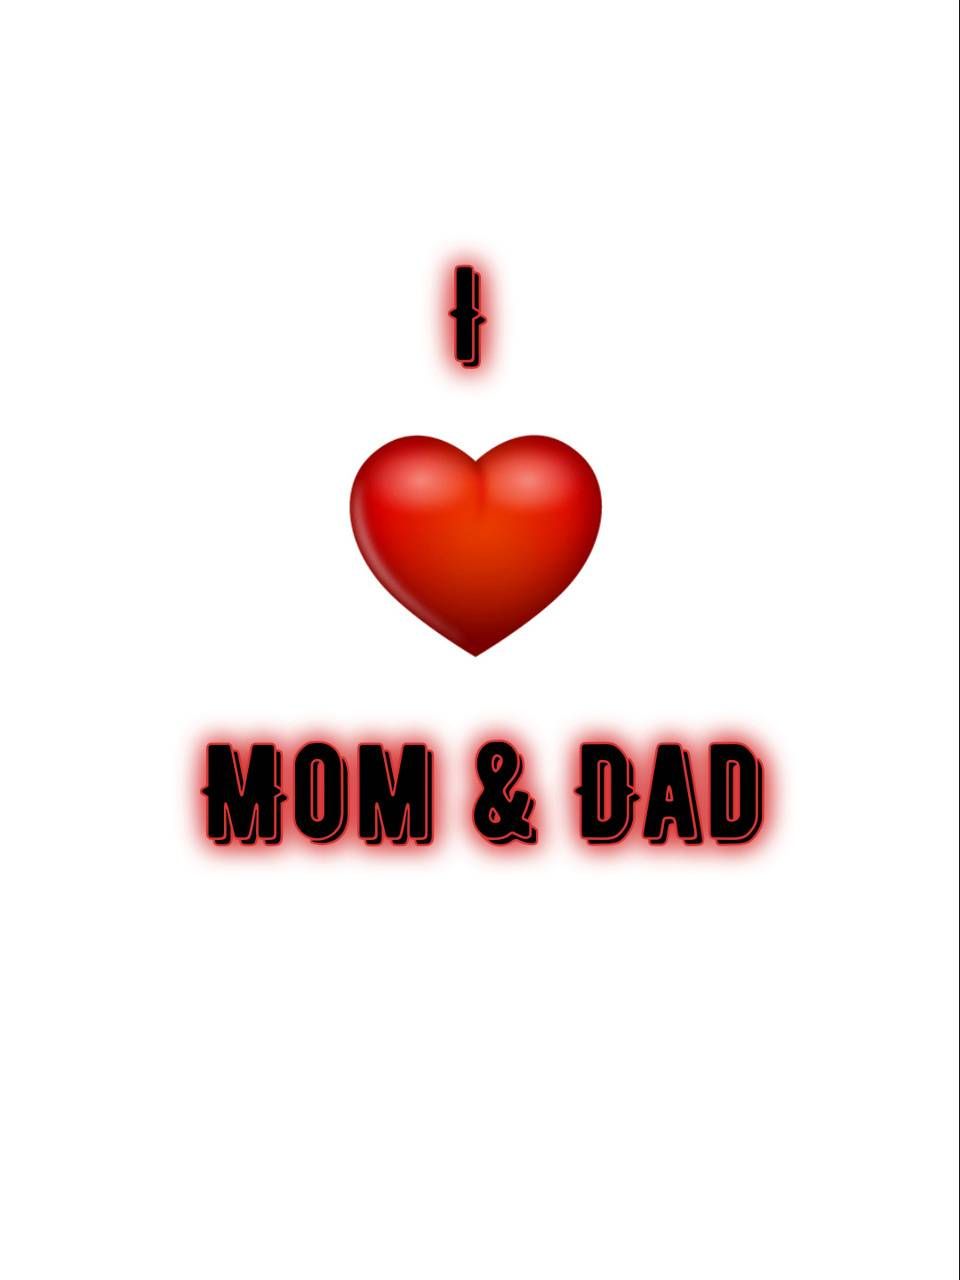 750 Mom And Dad Pictures  Download Free Images  Stock Photos on Unsplash